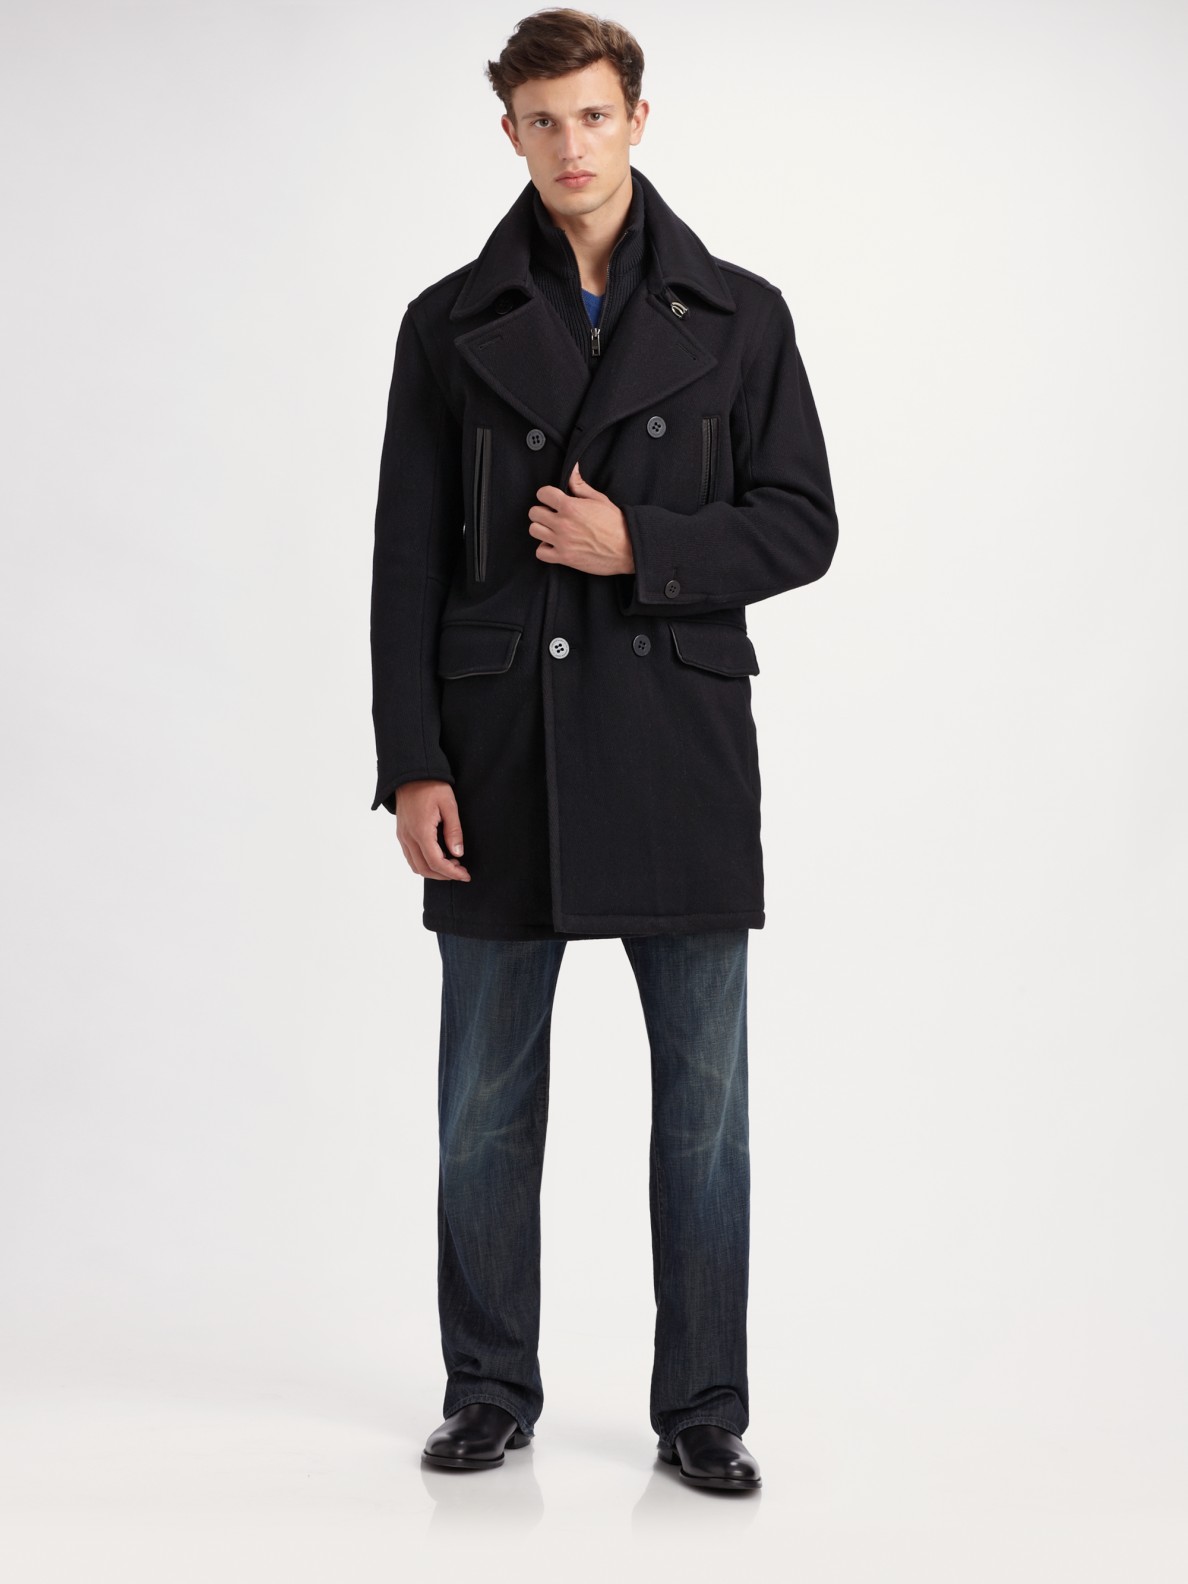 Lyst - Andrew Marc Sunday Driver Leather Car Coat in Black for Men